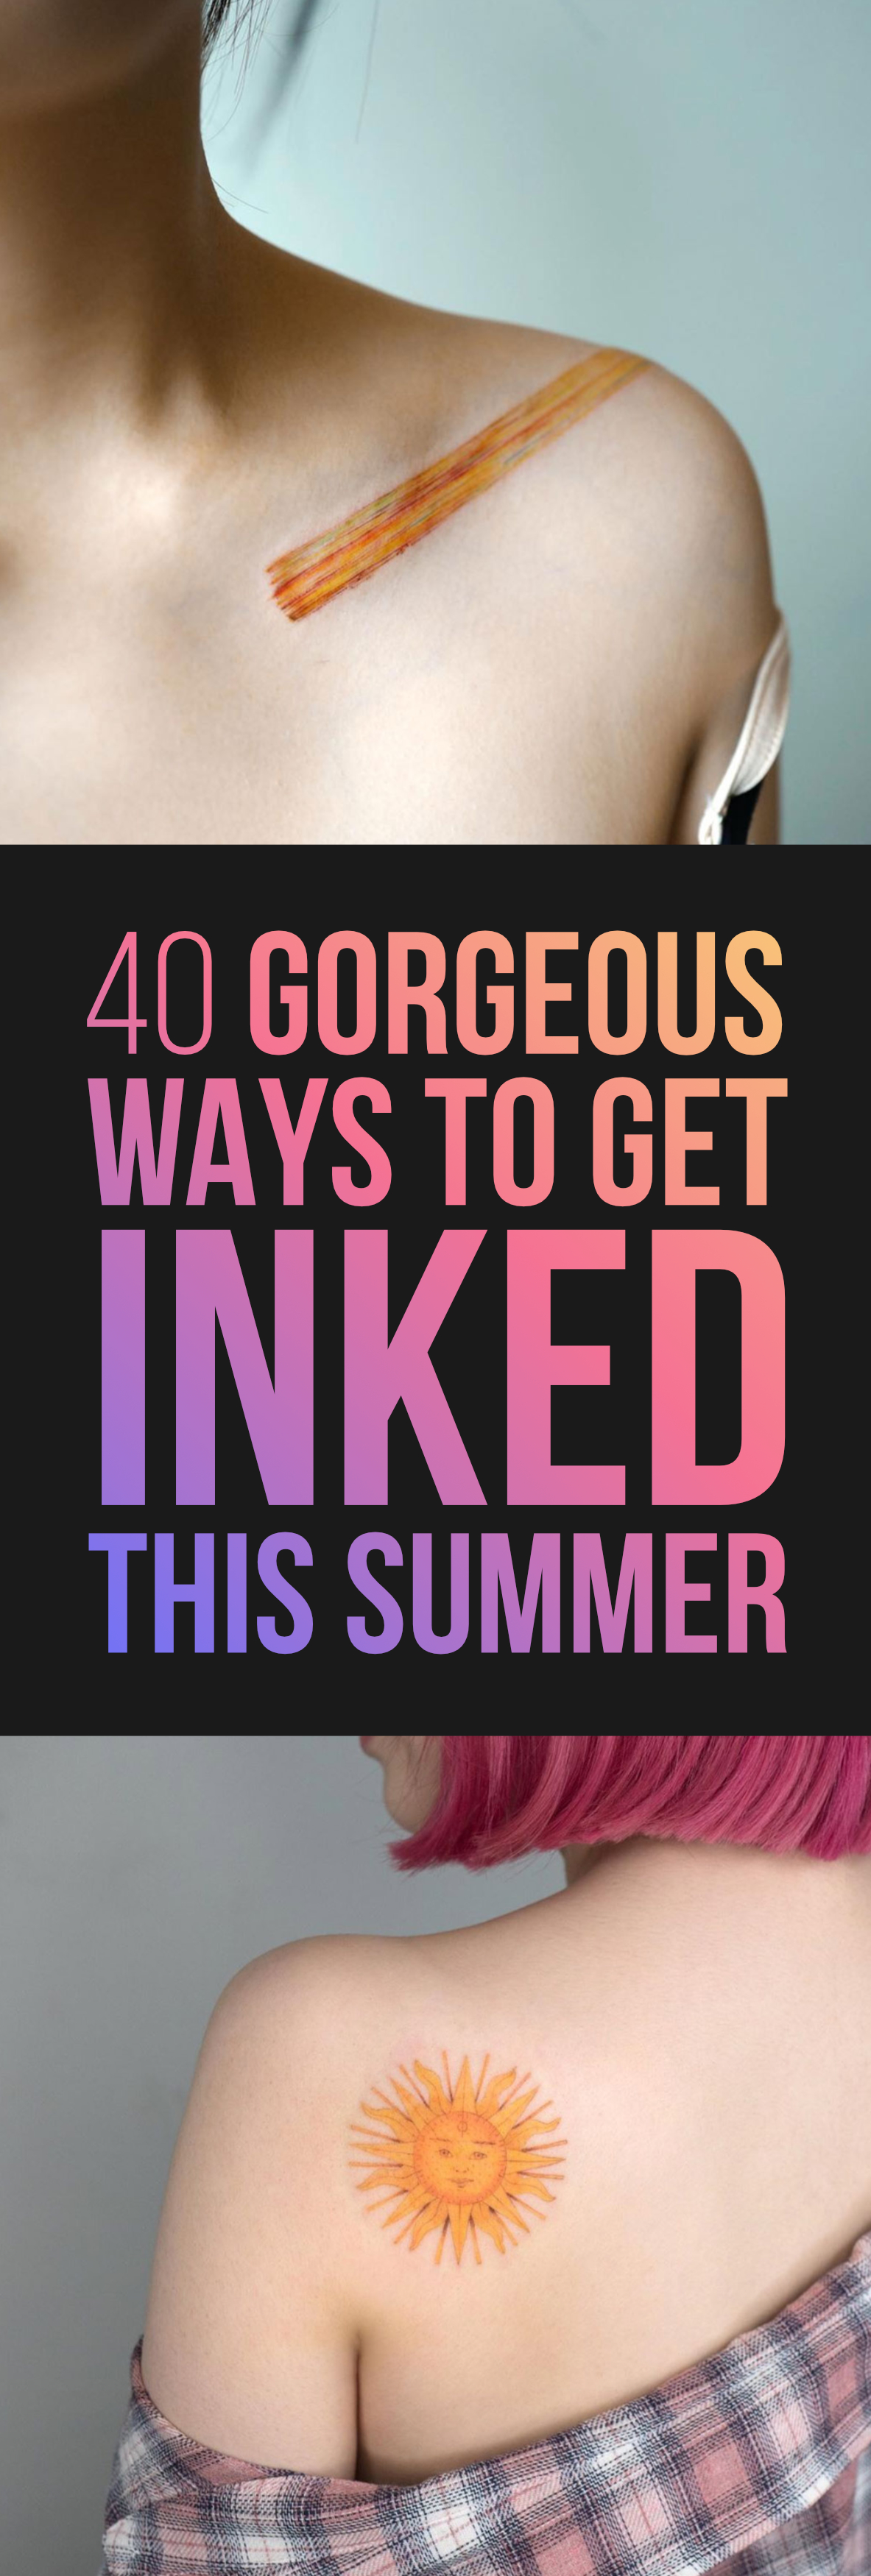 40 Gorgeous Ways to Get Inked This Summer